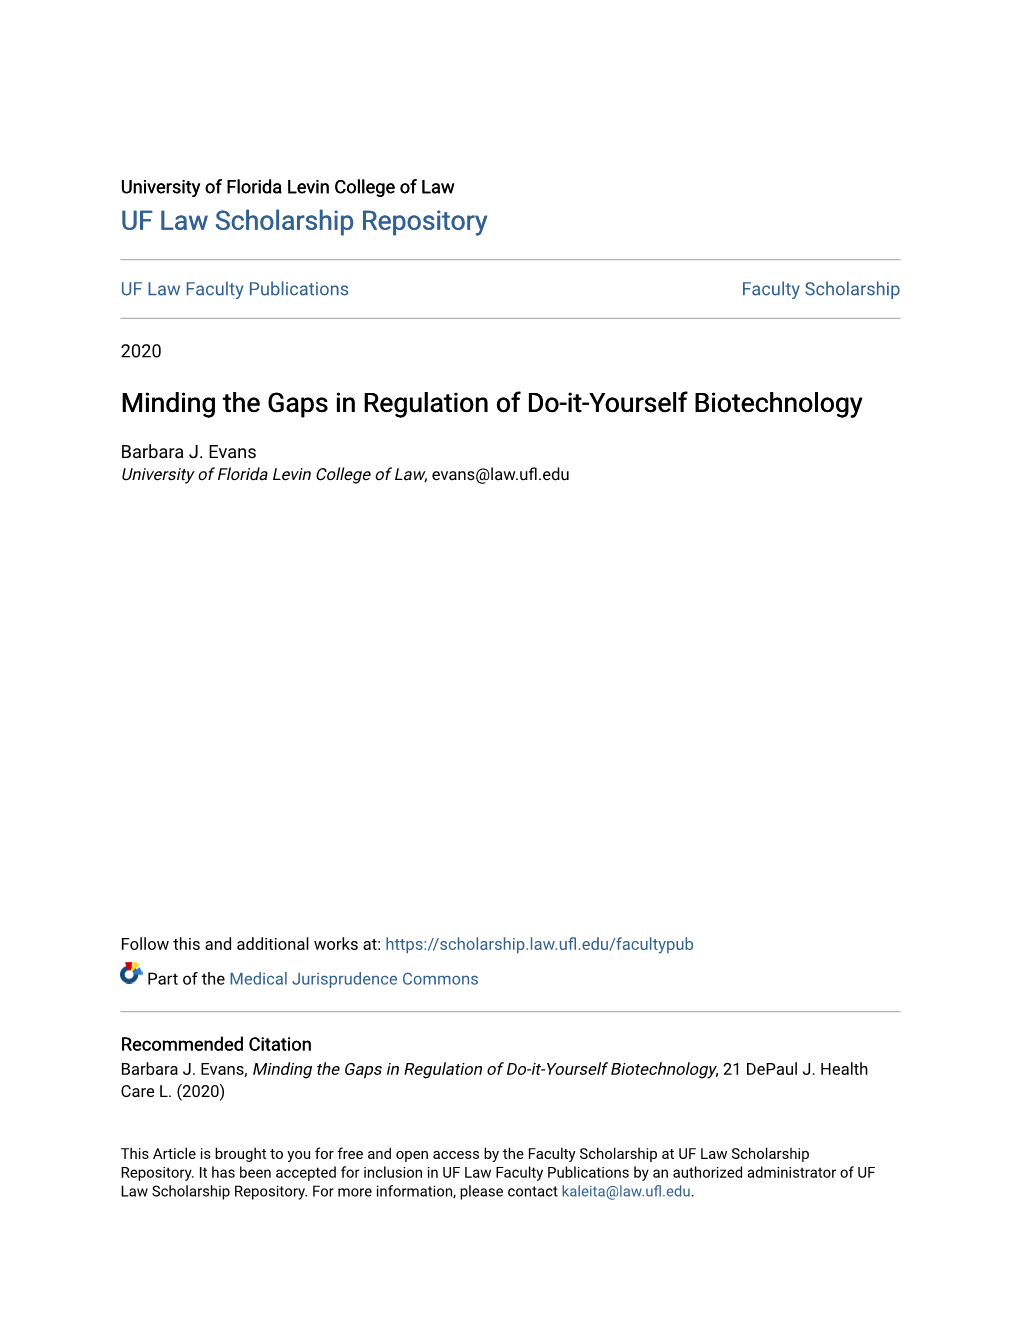 Minding the Gaps in Regulation of Do-It-Yourself Biotechnology